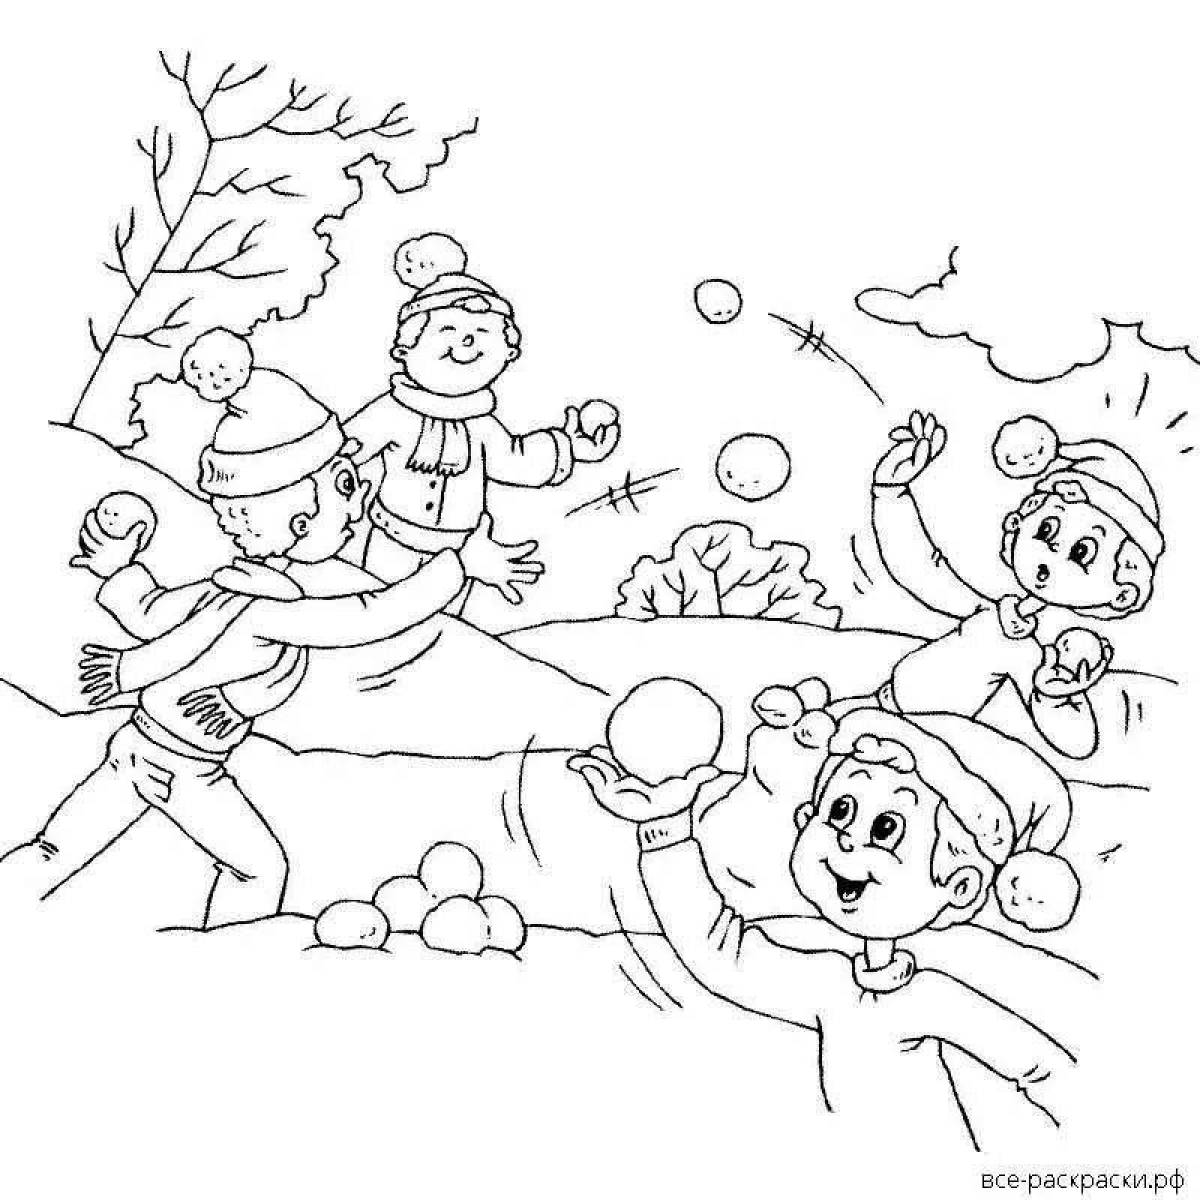 Ambitious winter games coloring book